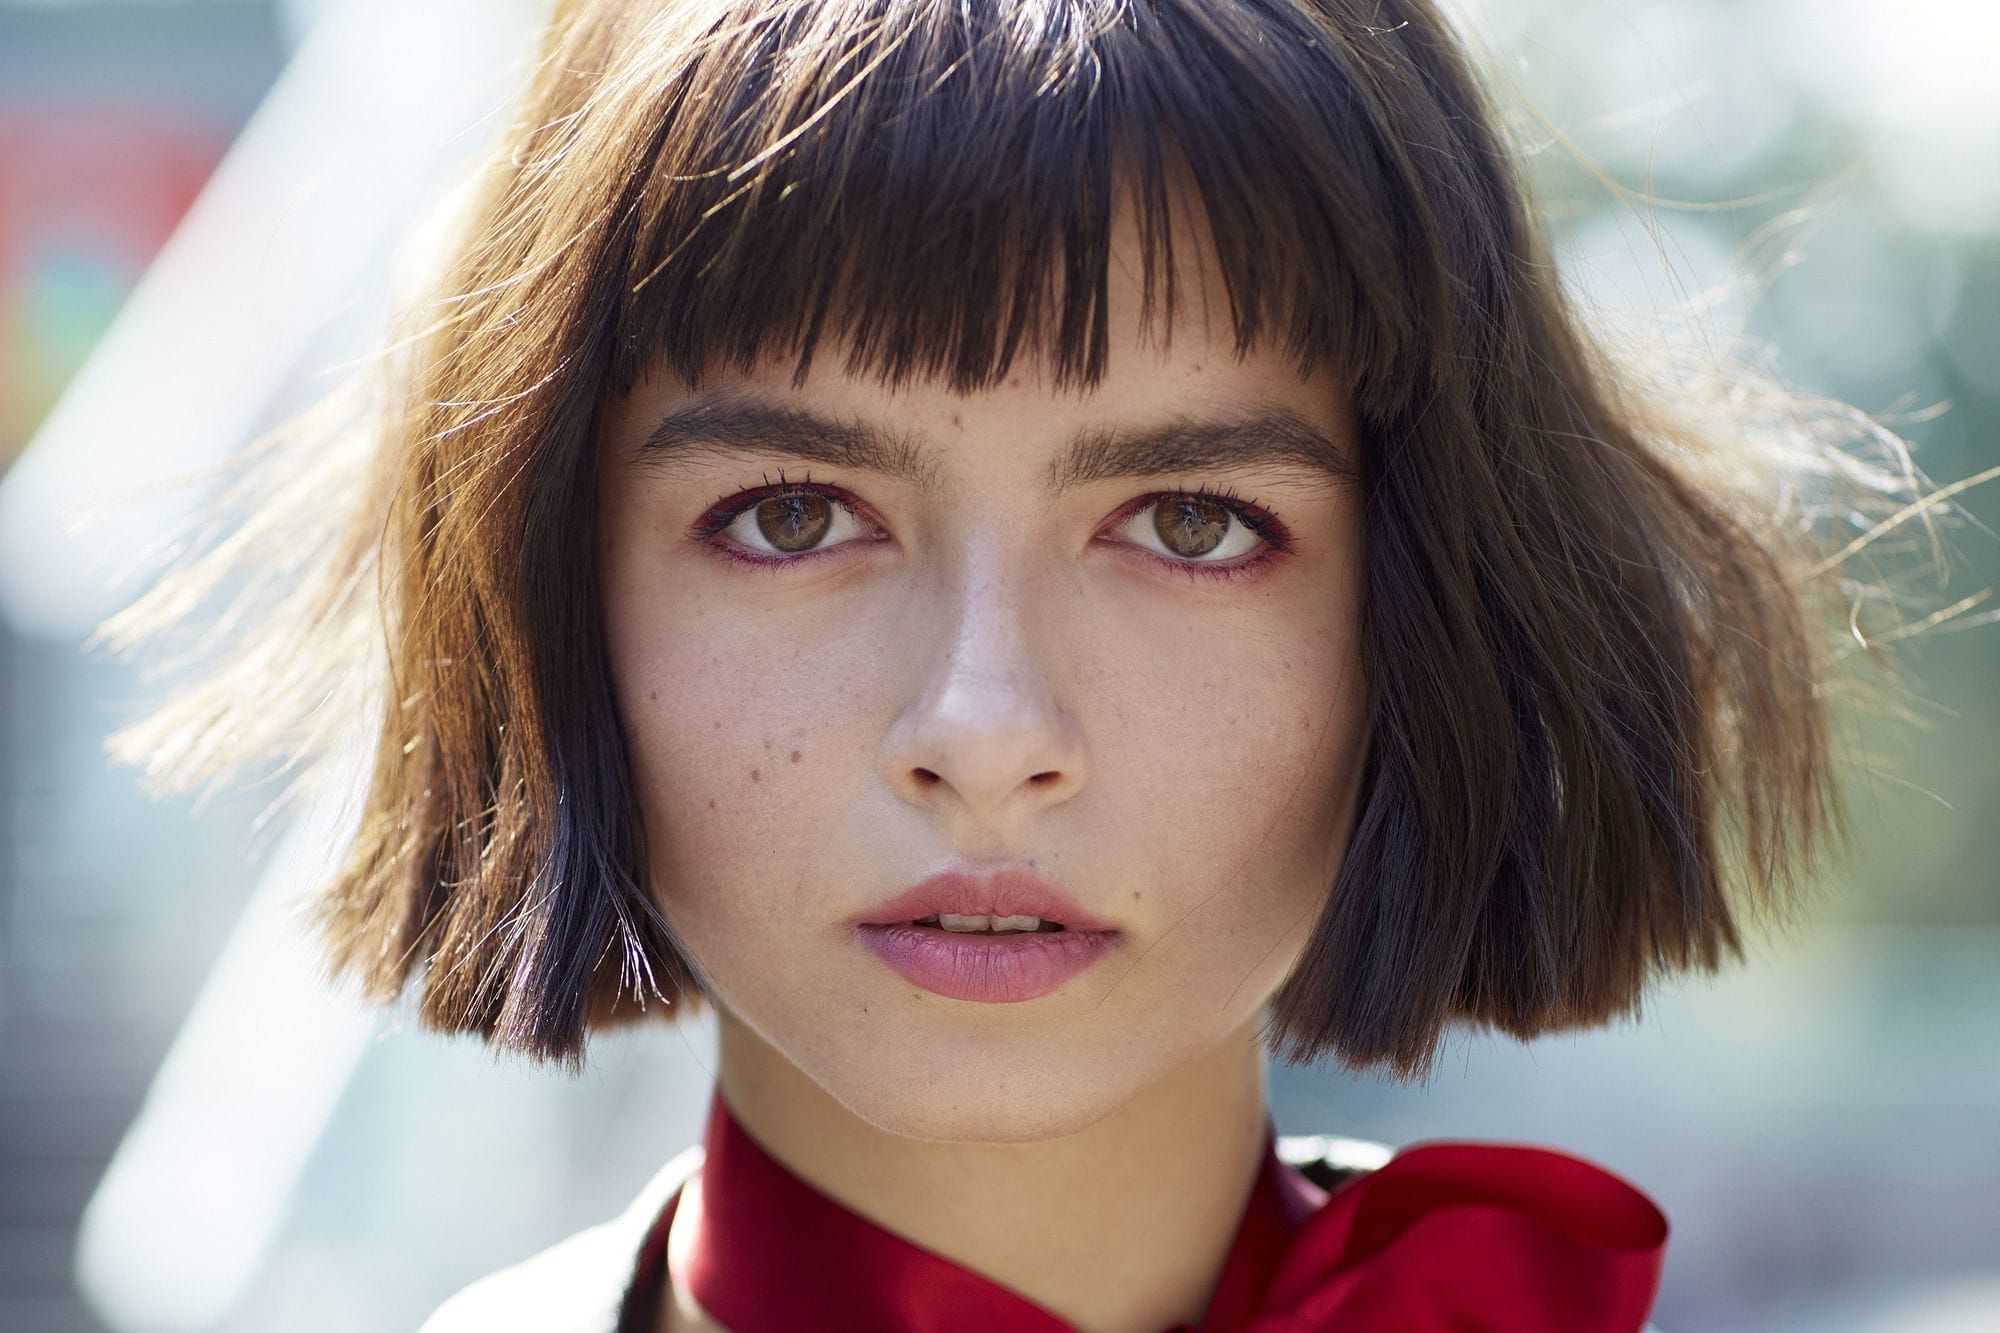 Short Hair With A Fringe: 8 Ways To Rock The Look Like A True Regarding Short Haircuts With Fringe Bangs (View 17 of 25)